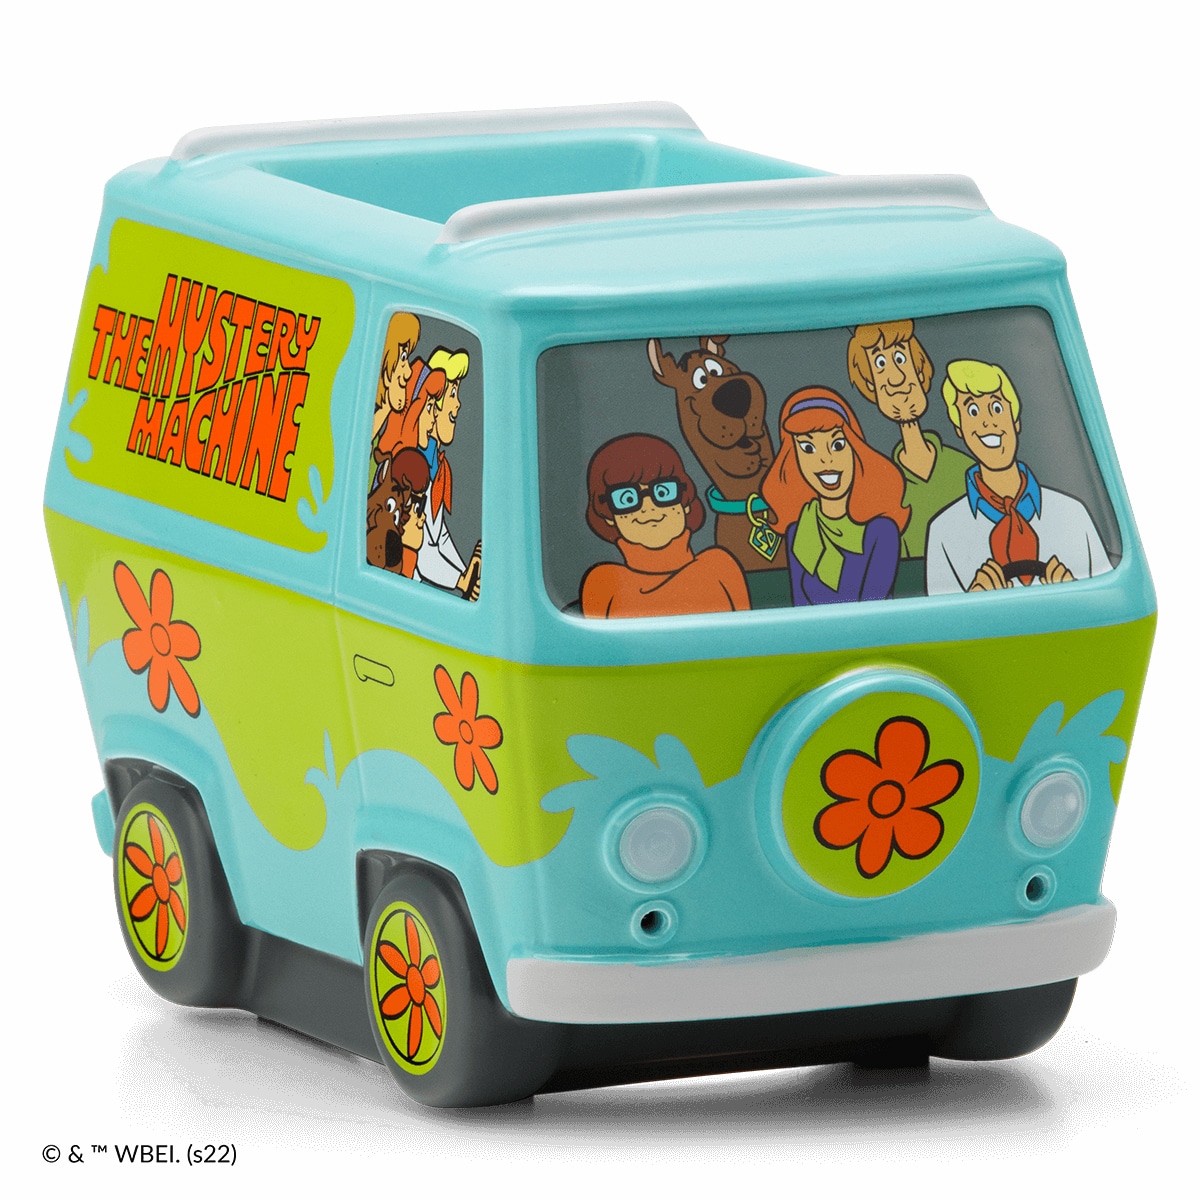 Item details: THE MYSTERY MACHINE with SCOOBY DOO and the gang!! A